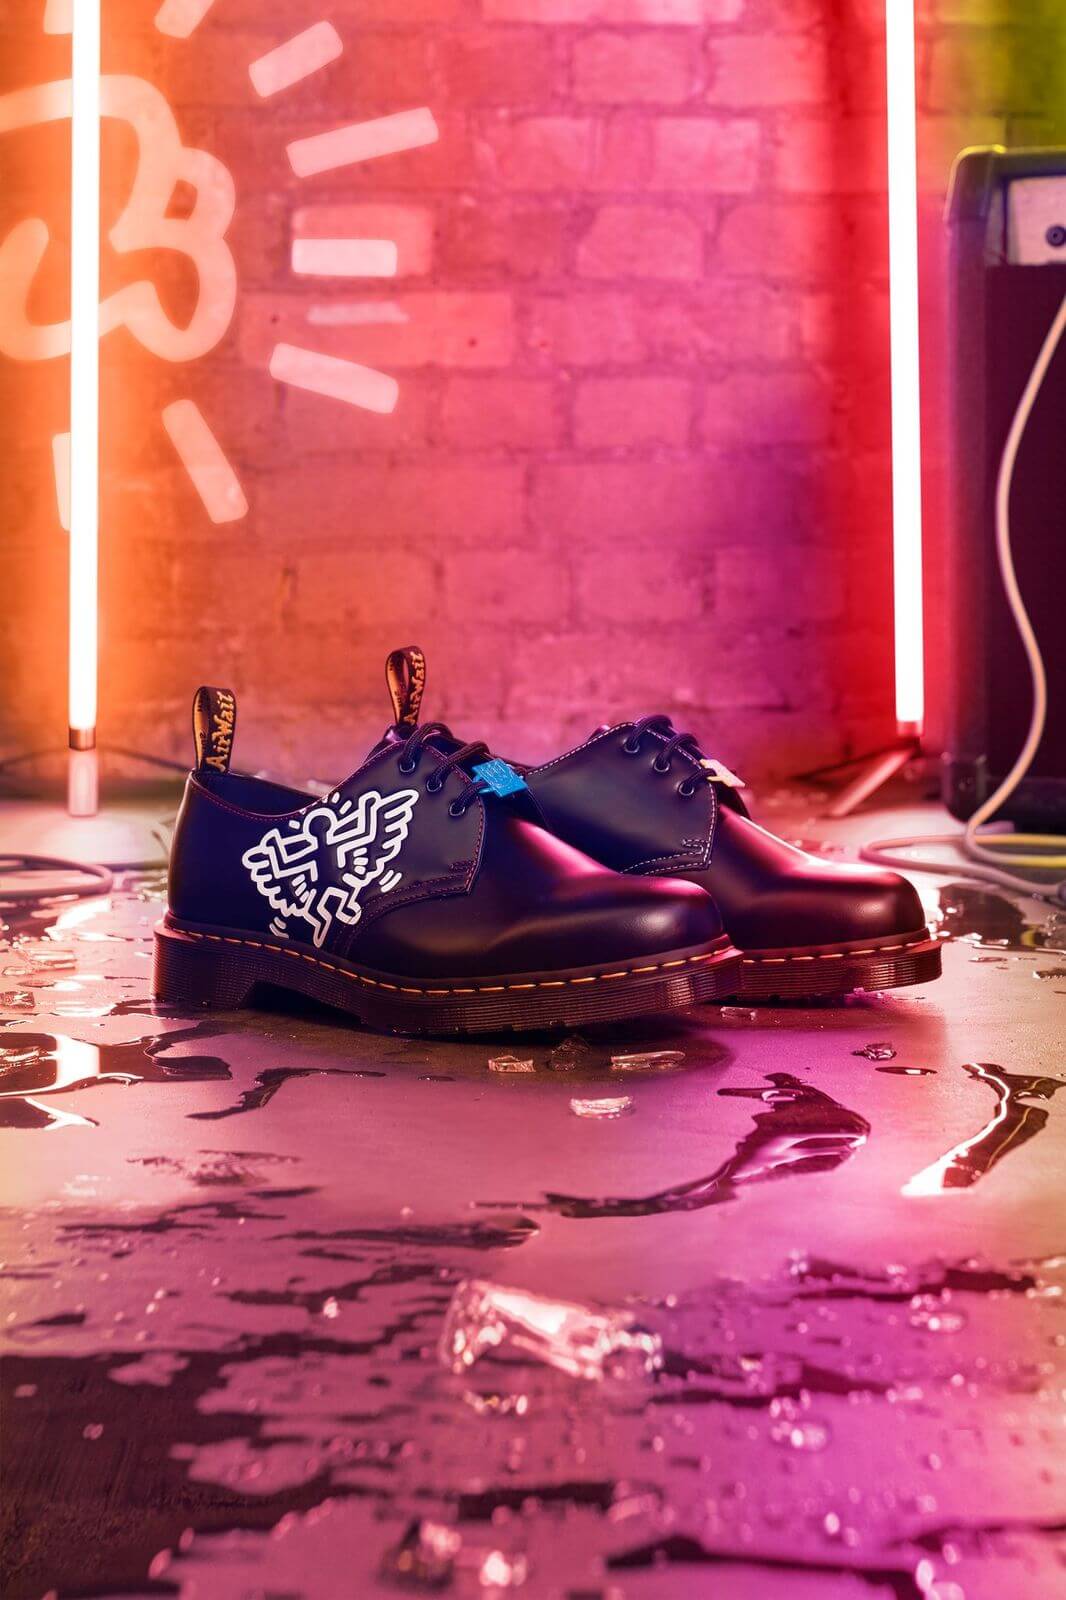 DR. MARTENS x KEITH HARING